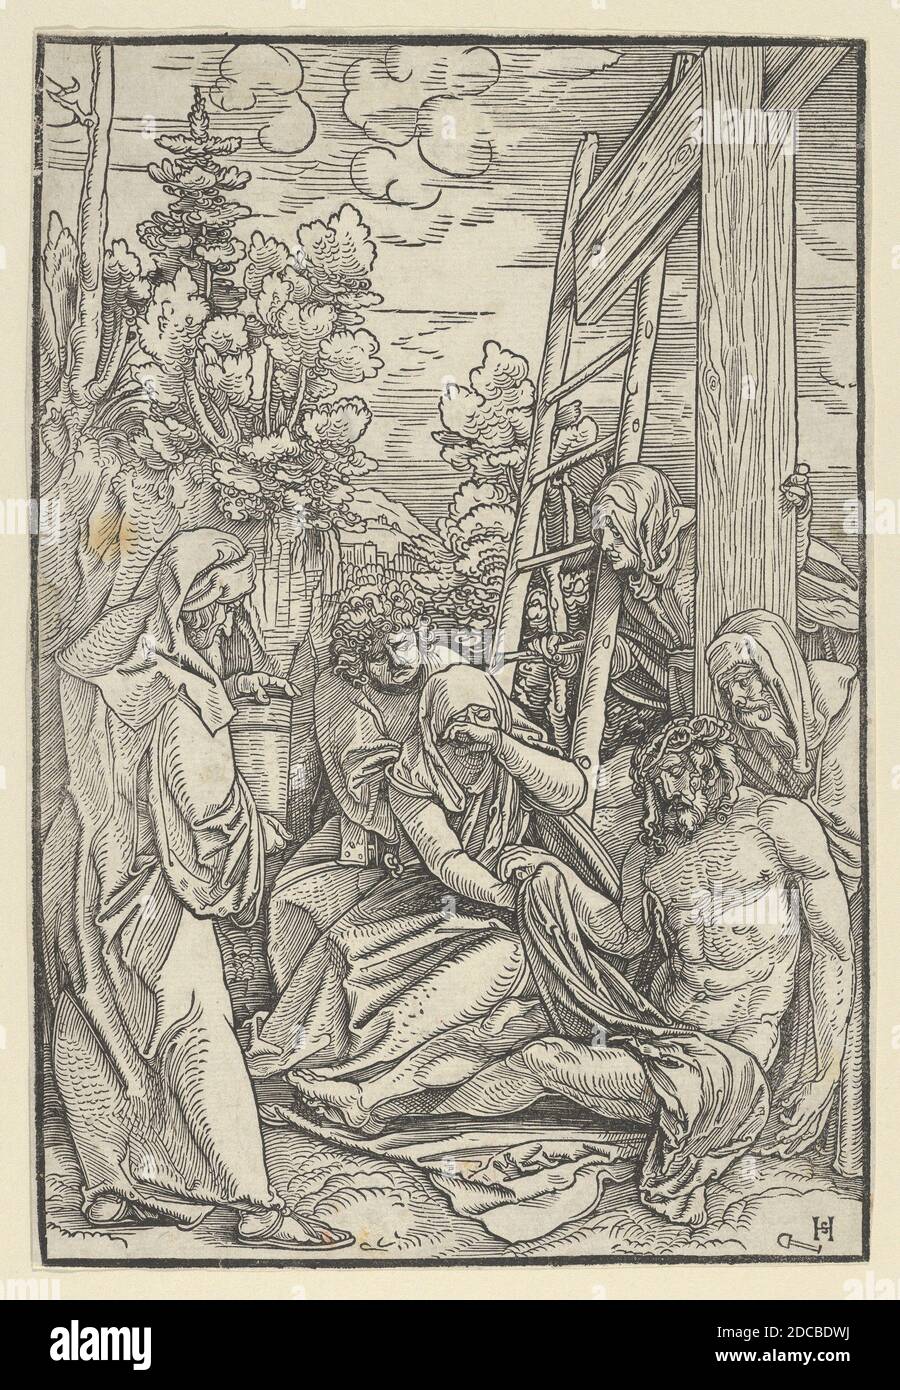 The Lamentation, from The Life of Christ, ca. 1511-12. Stock Photo